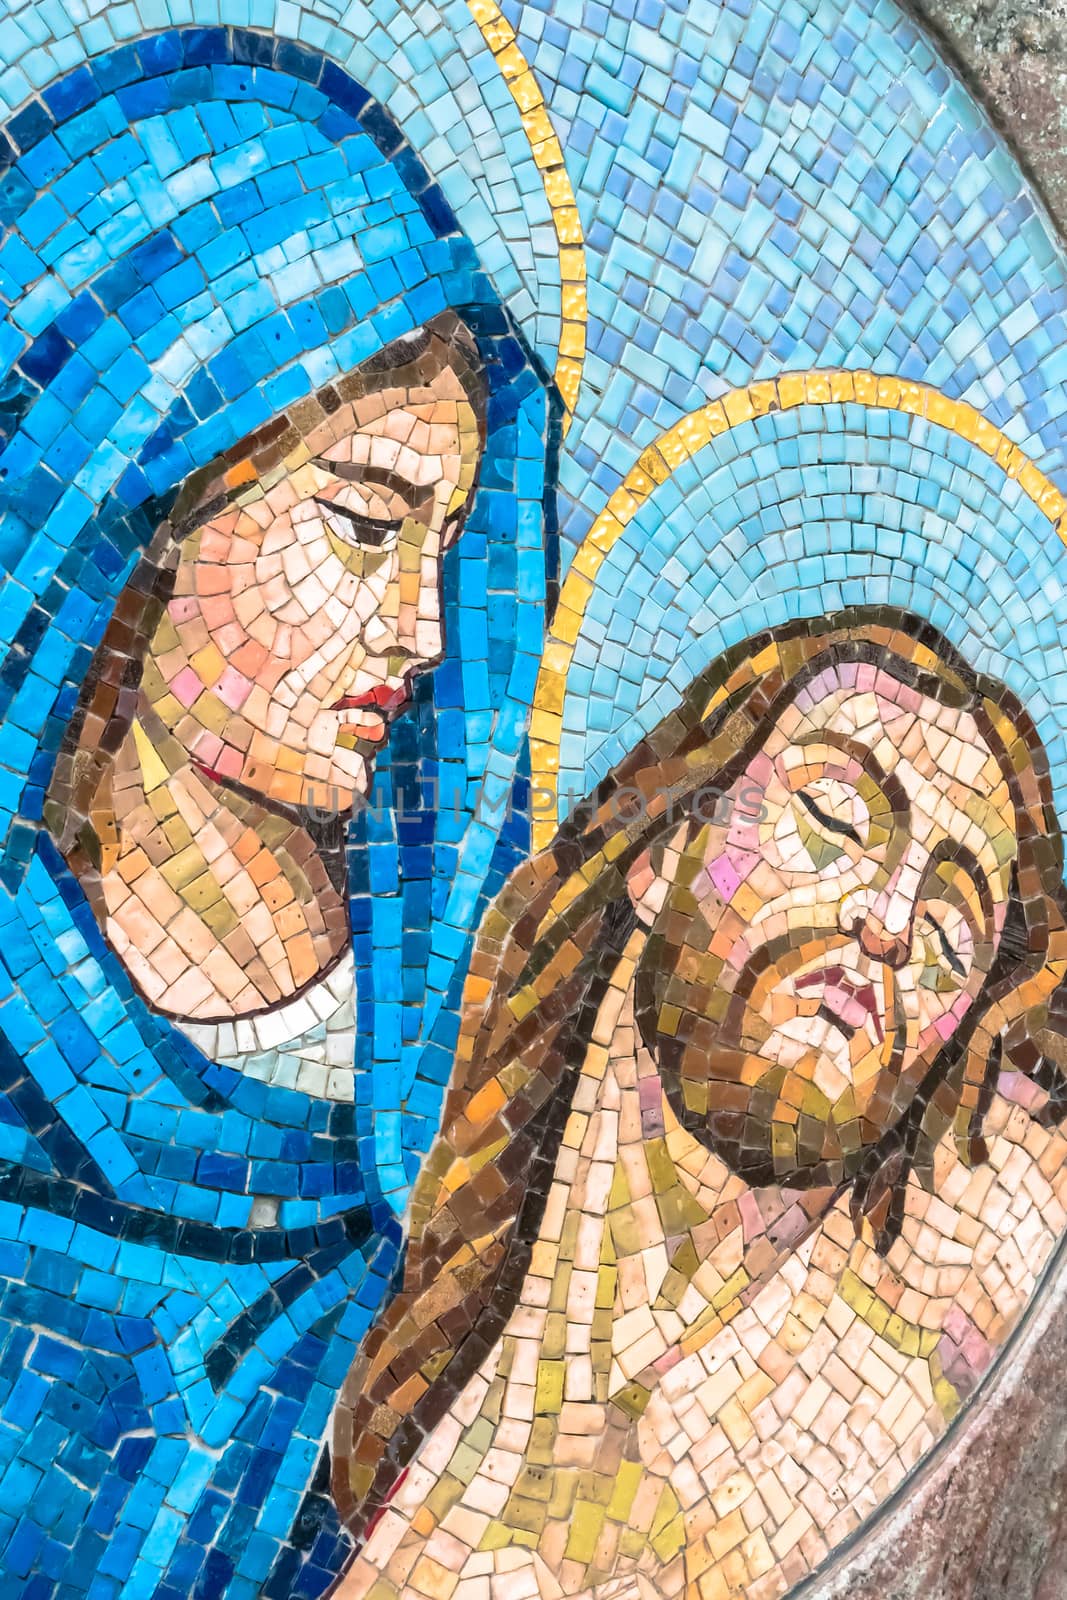 Mosaic depiction of Christ's body being in the arms of the Virgin Mary